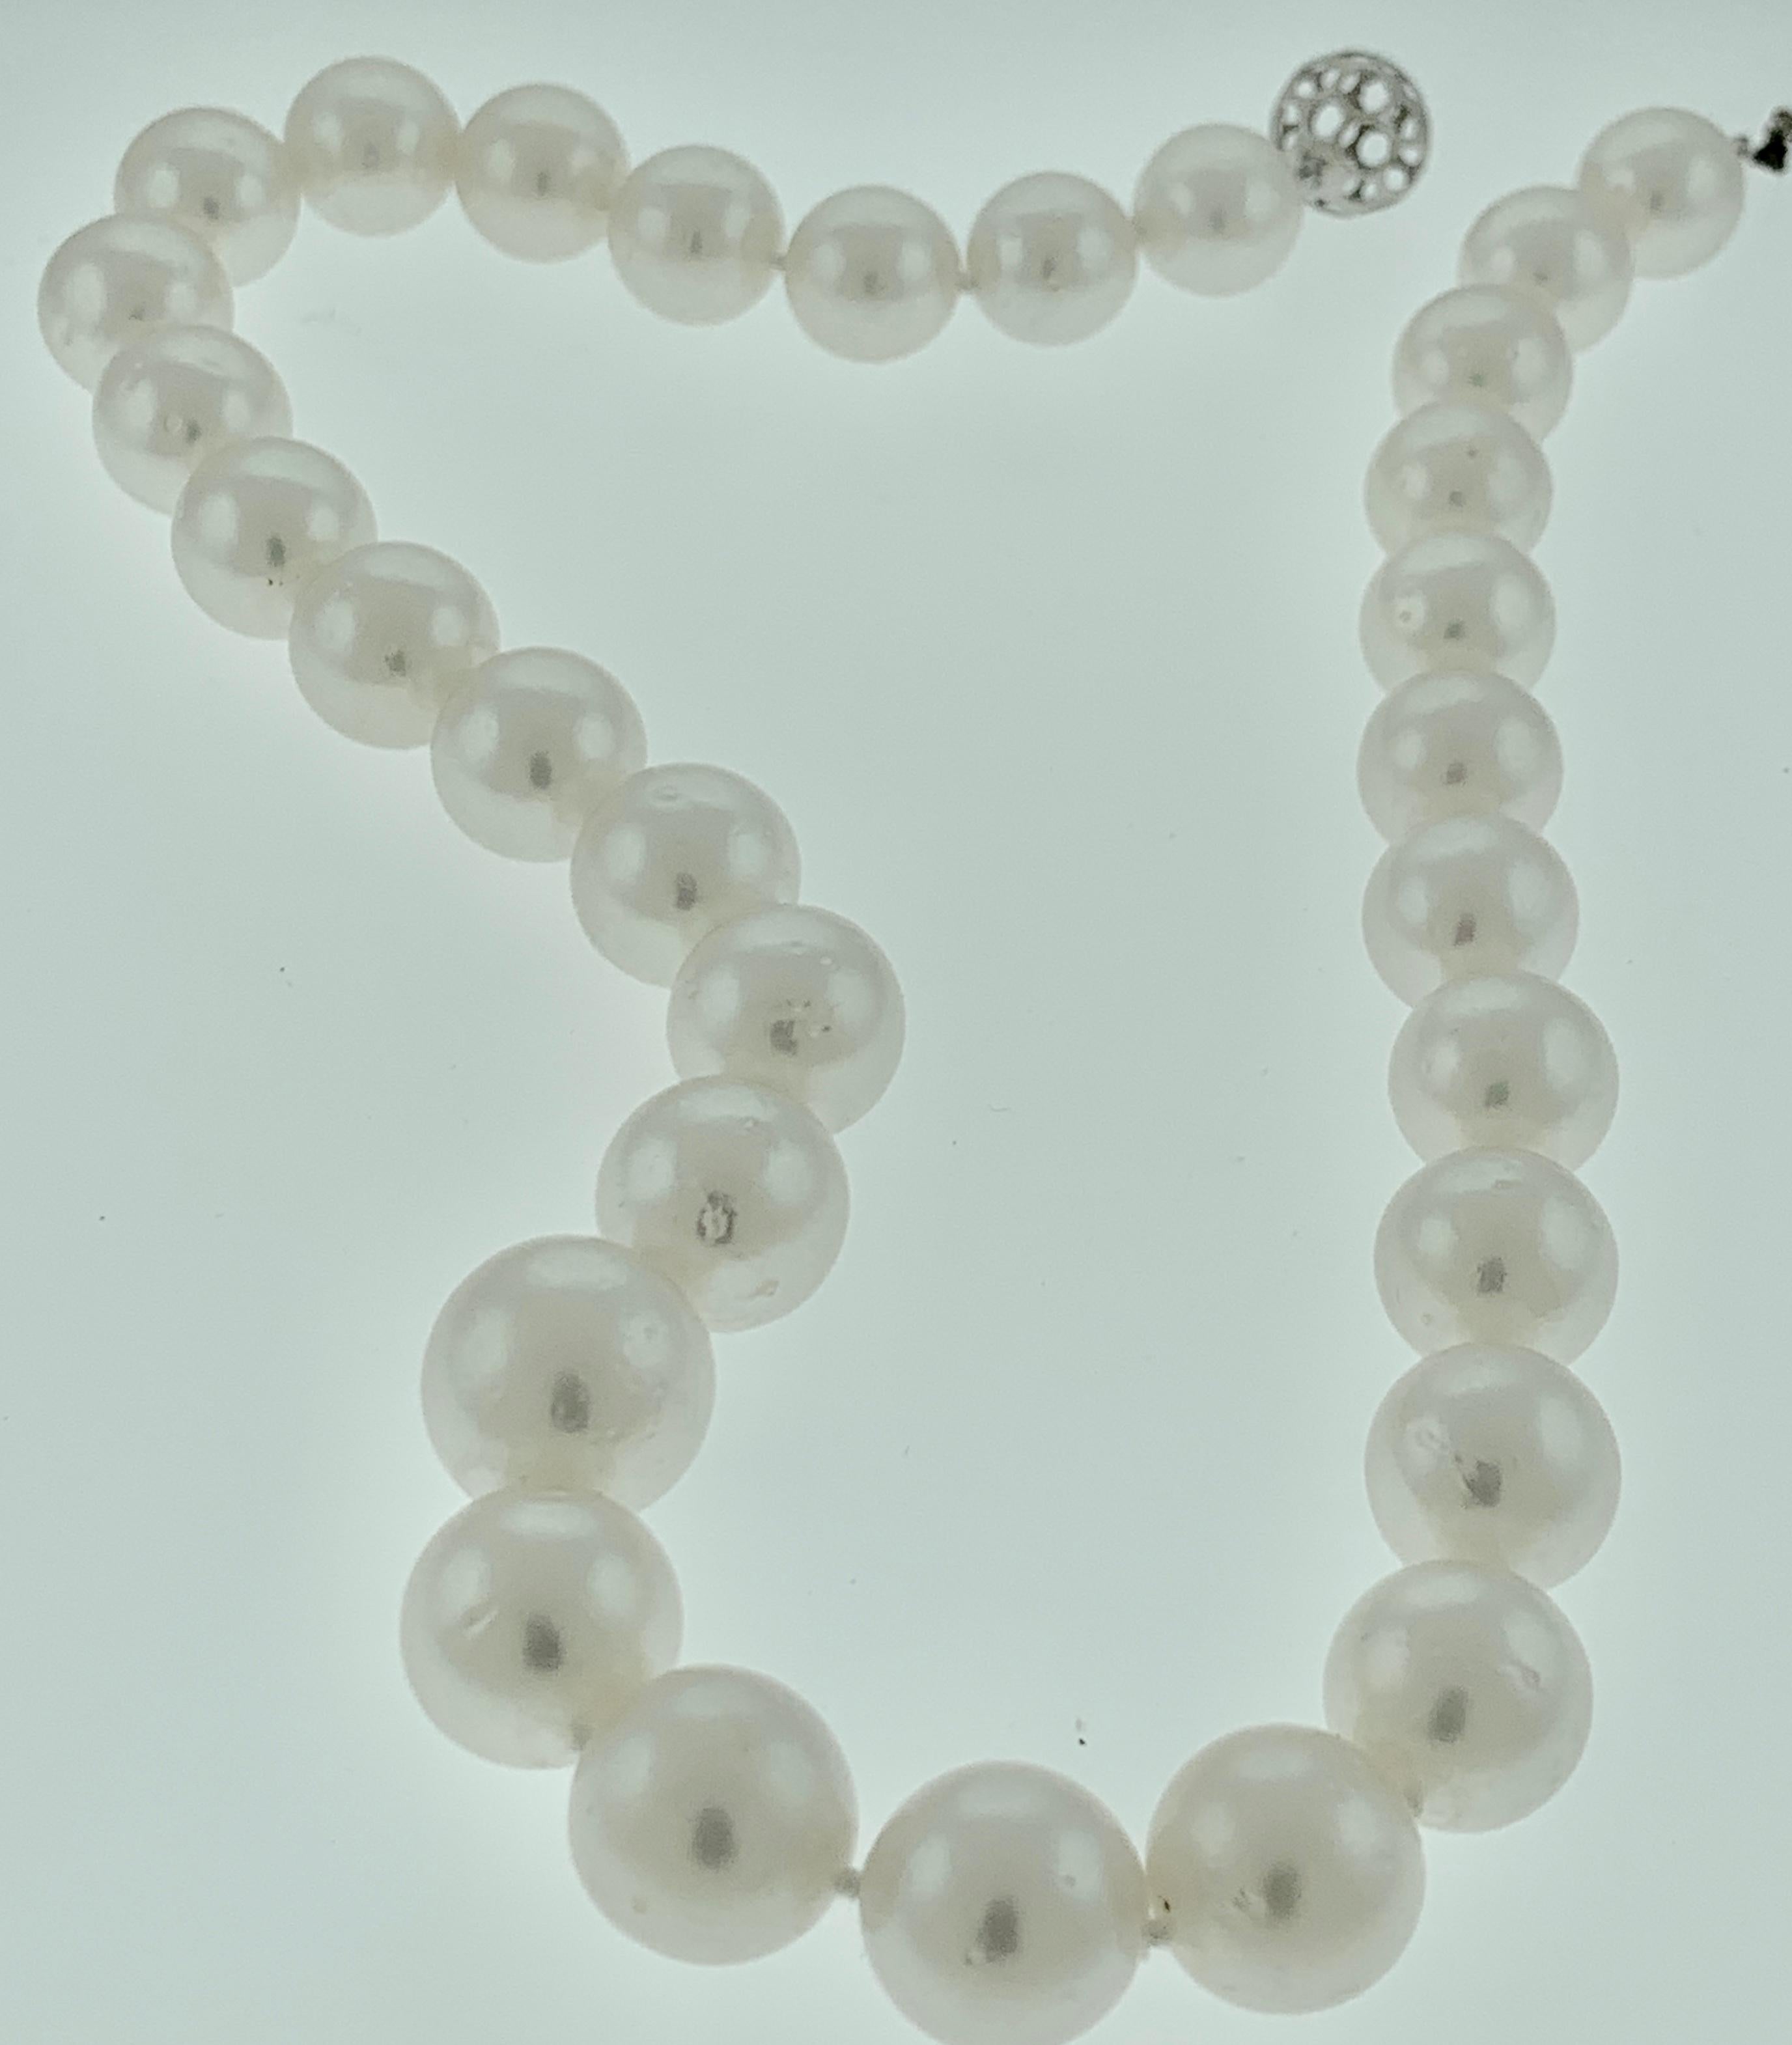 White South Sea Pearls Long Strand Necklace 14 Karat Gold Clasp In Excellent Condition For Sale In New York, NY